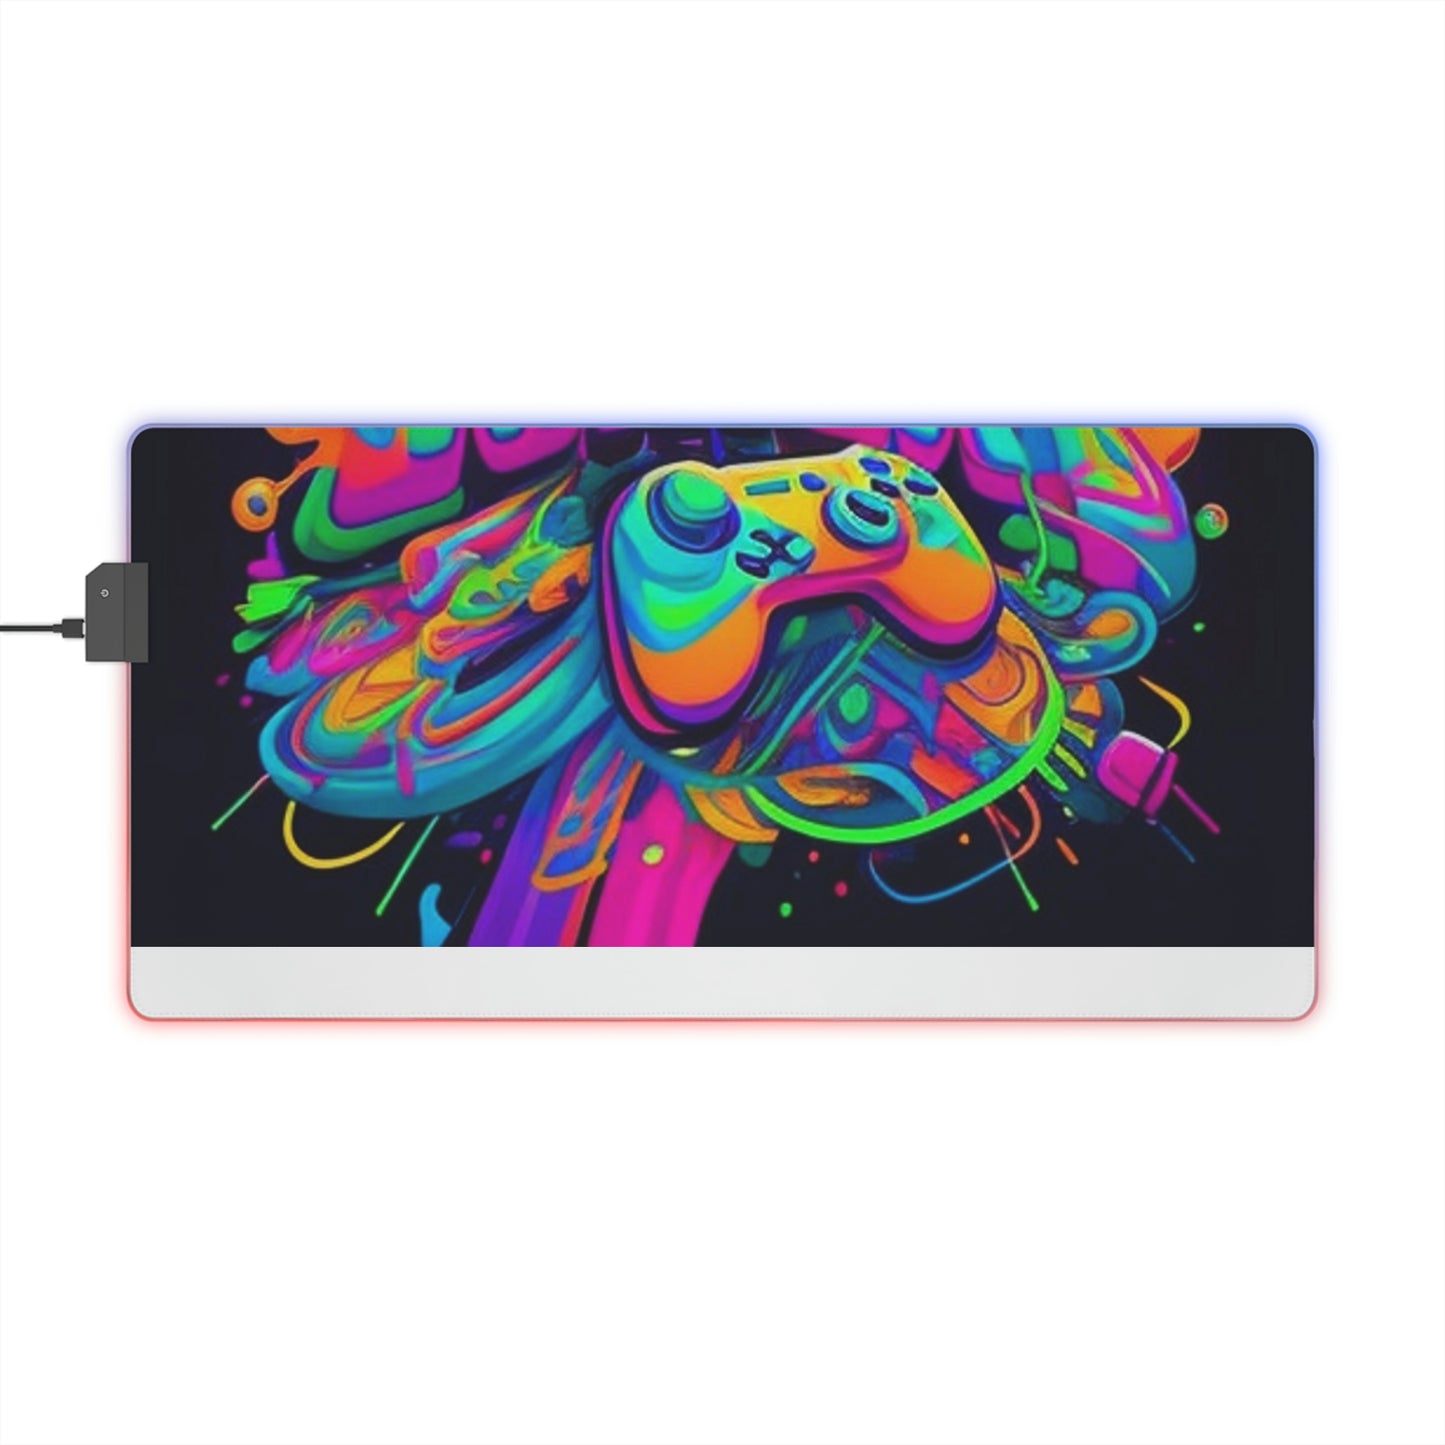 LED Gaming Mouse Pad Neon Gaming 2